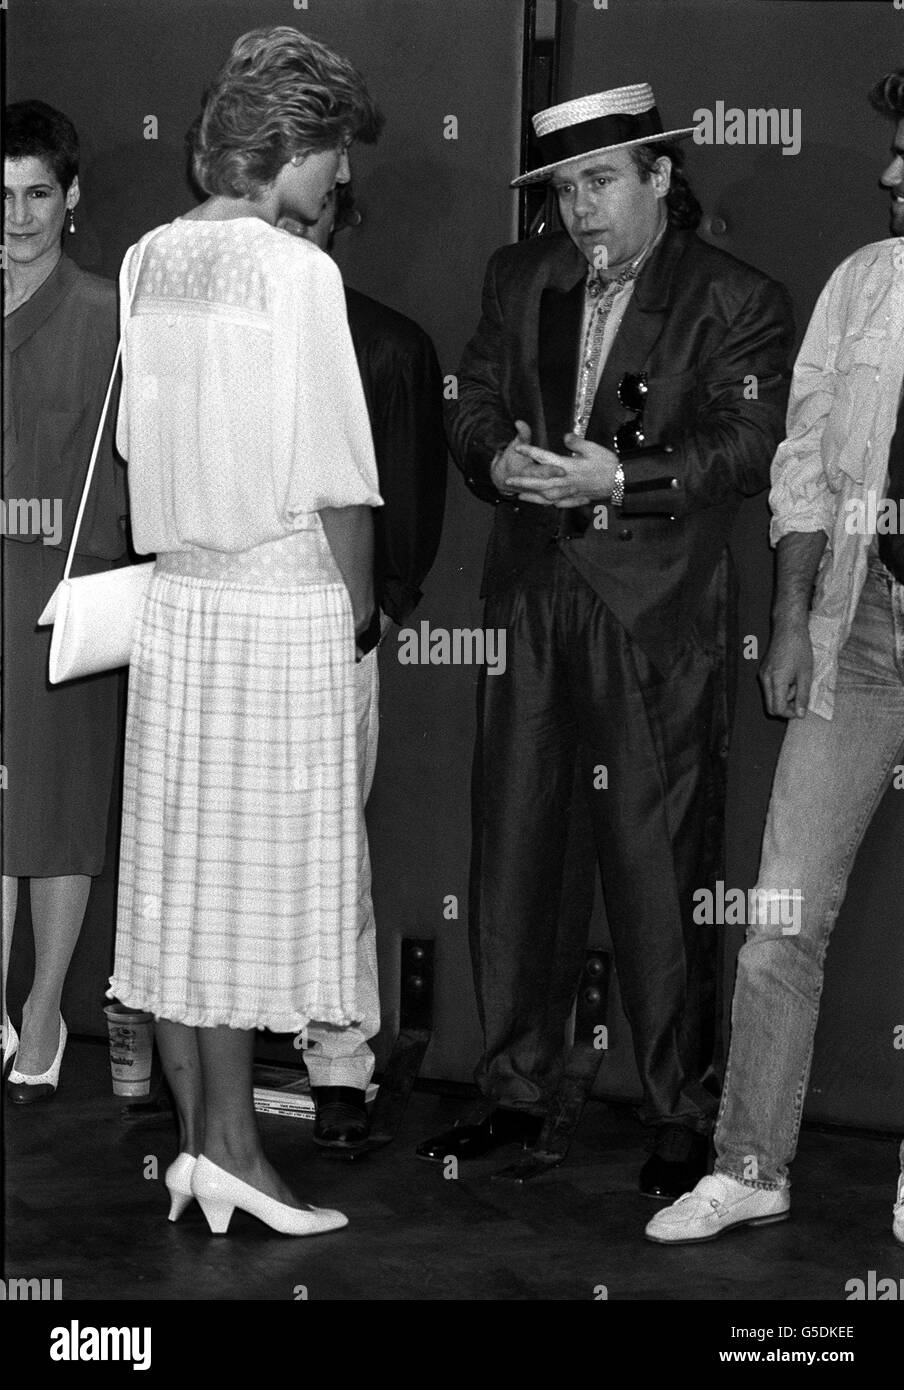 1985: The Princess of Wales opened the massive Live Aid concert in aid of the African famine at Wembley Stadium, London. She is pictured here with Elton John, one of the many artistes appearing in the transatlantic event. Stock Photo